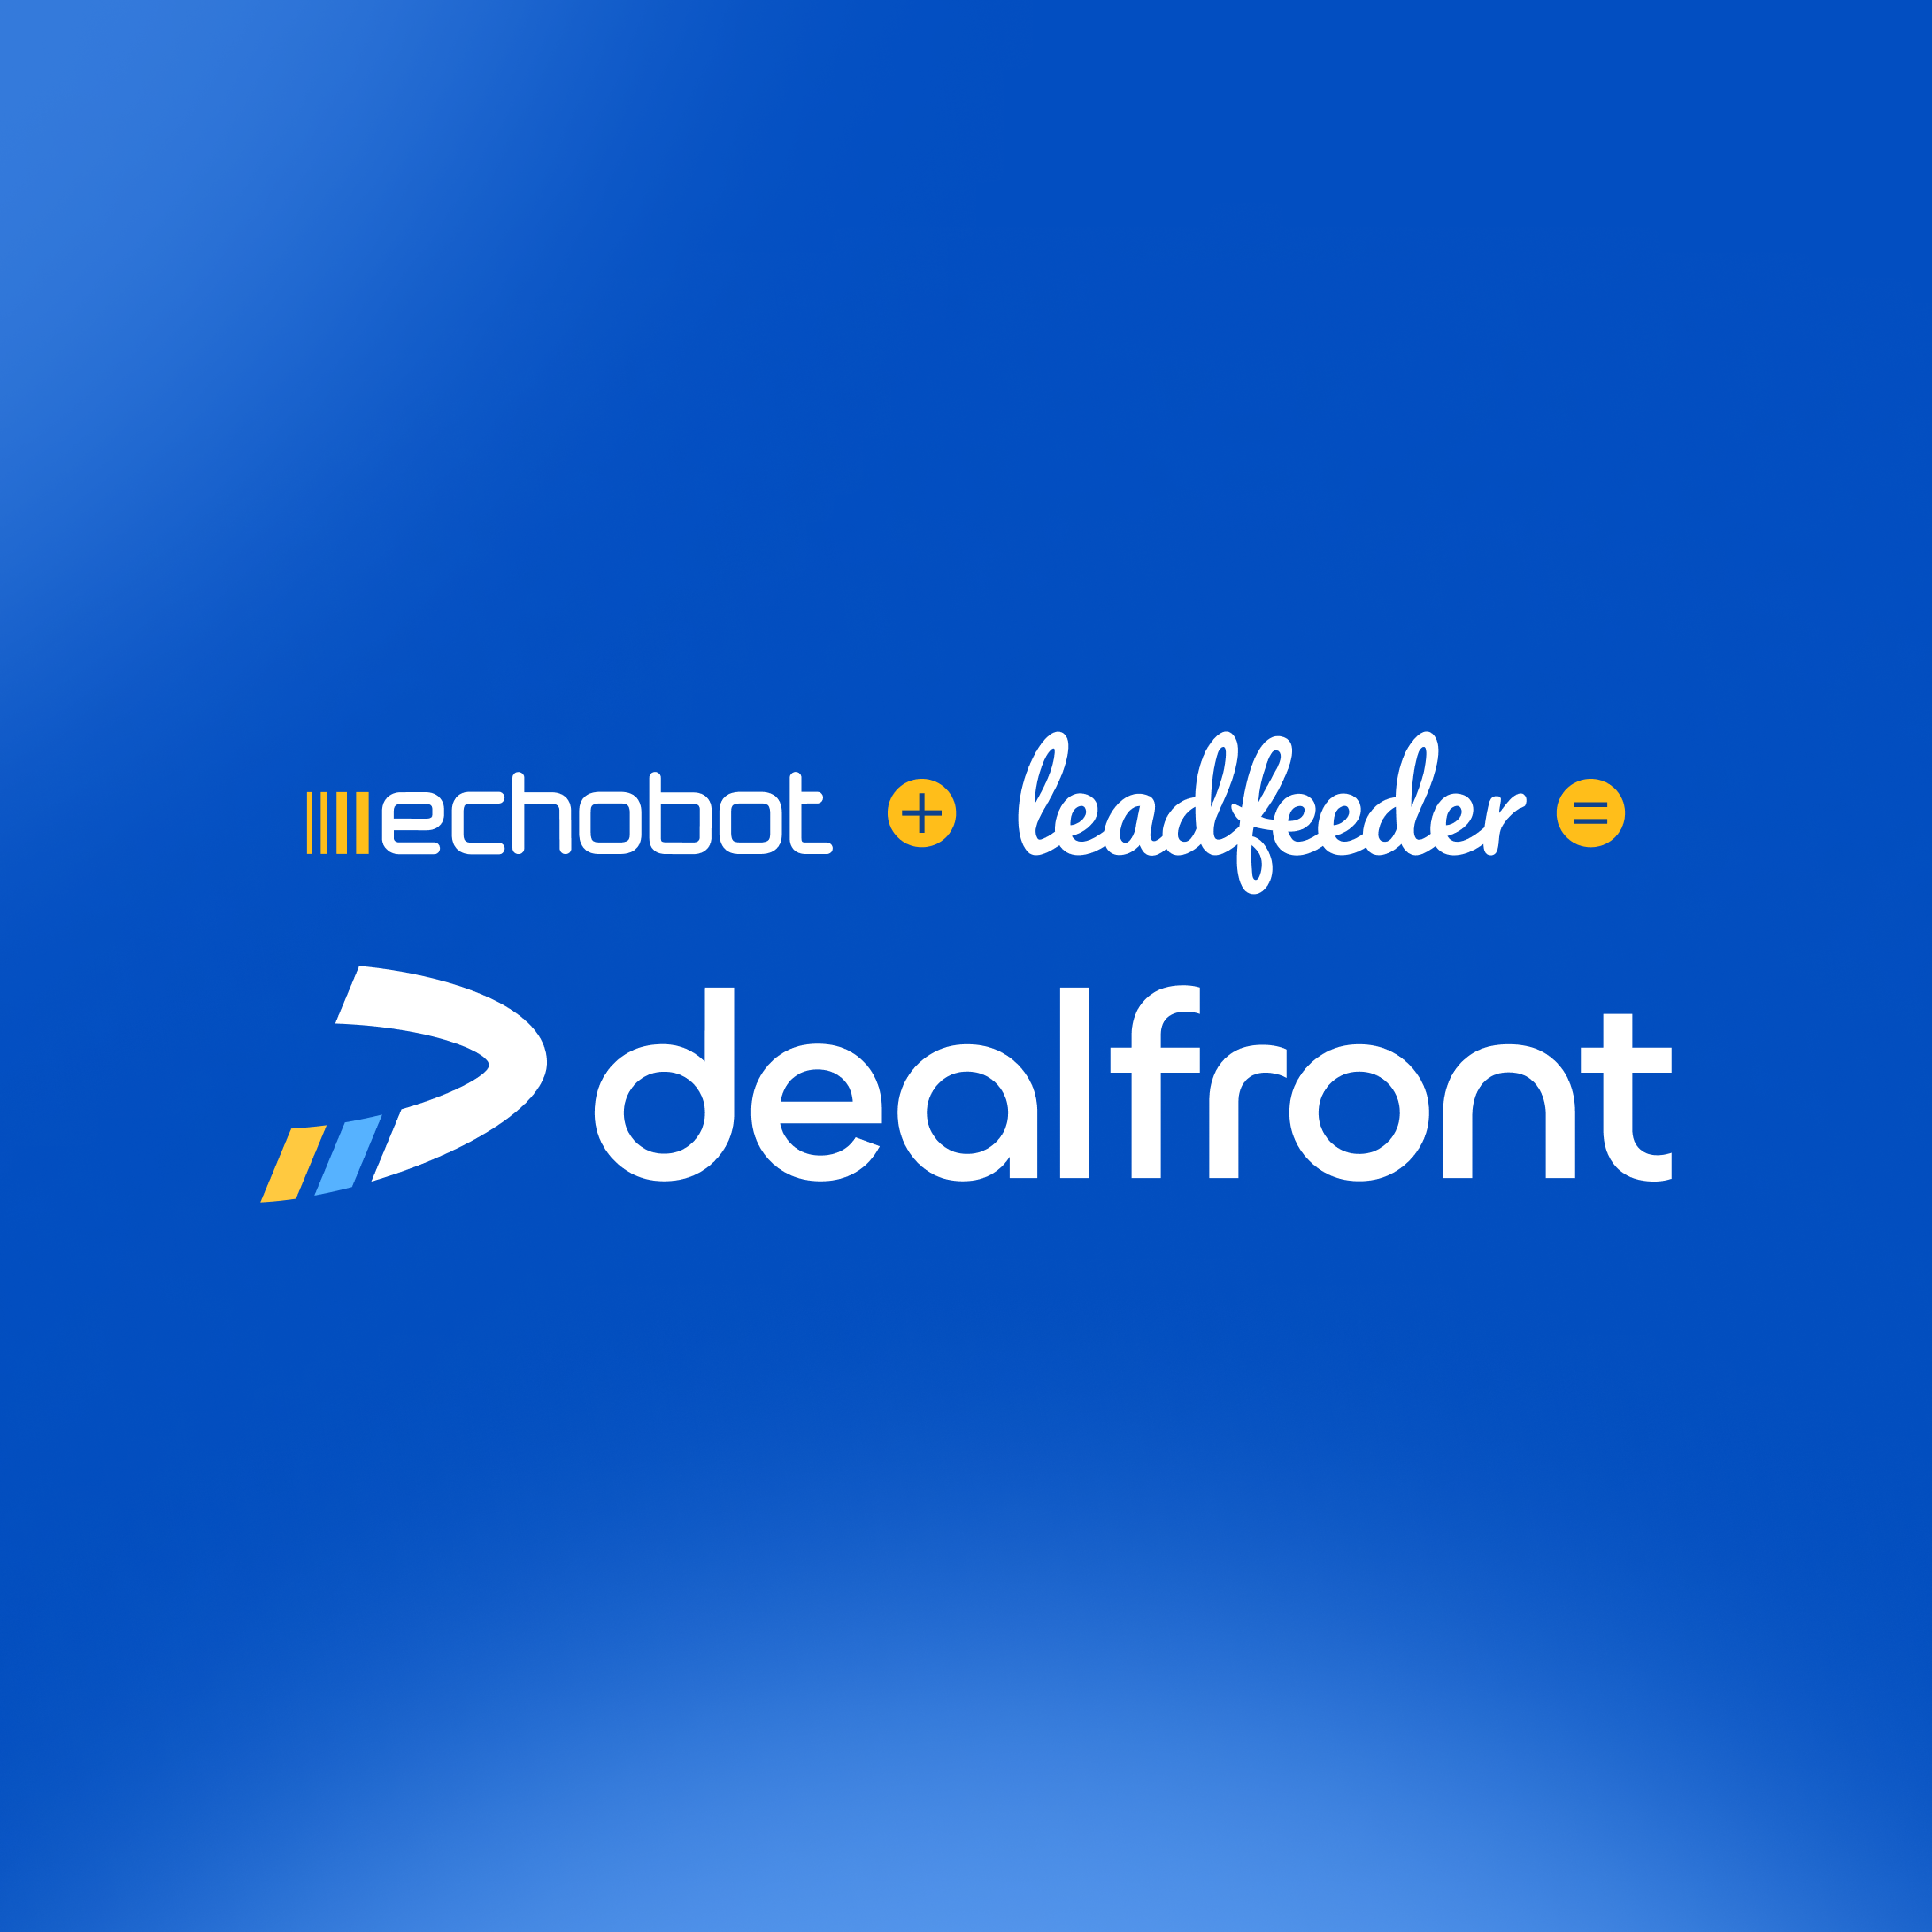 Say Hello to Our New Brand: Echobot is Now Dealfront